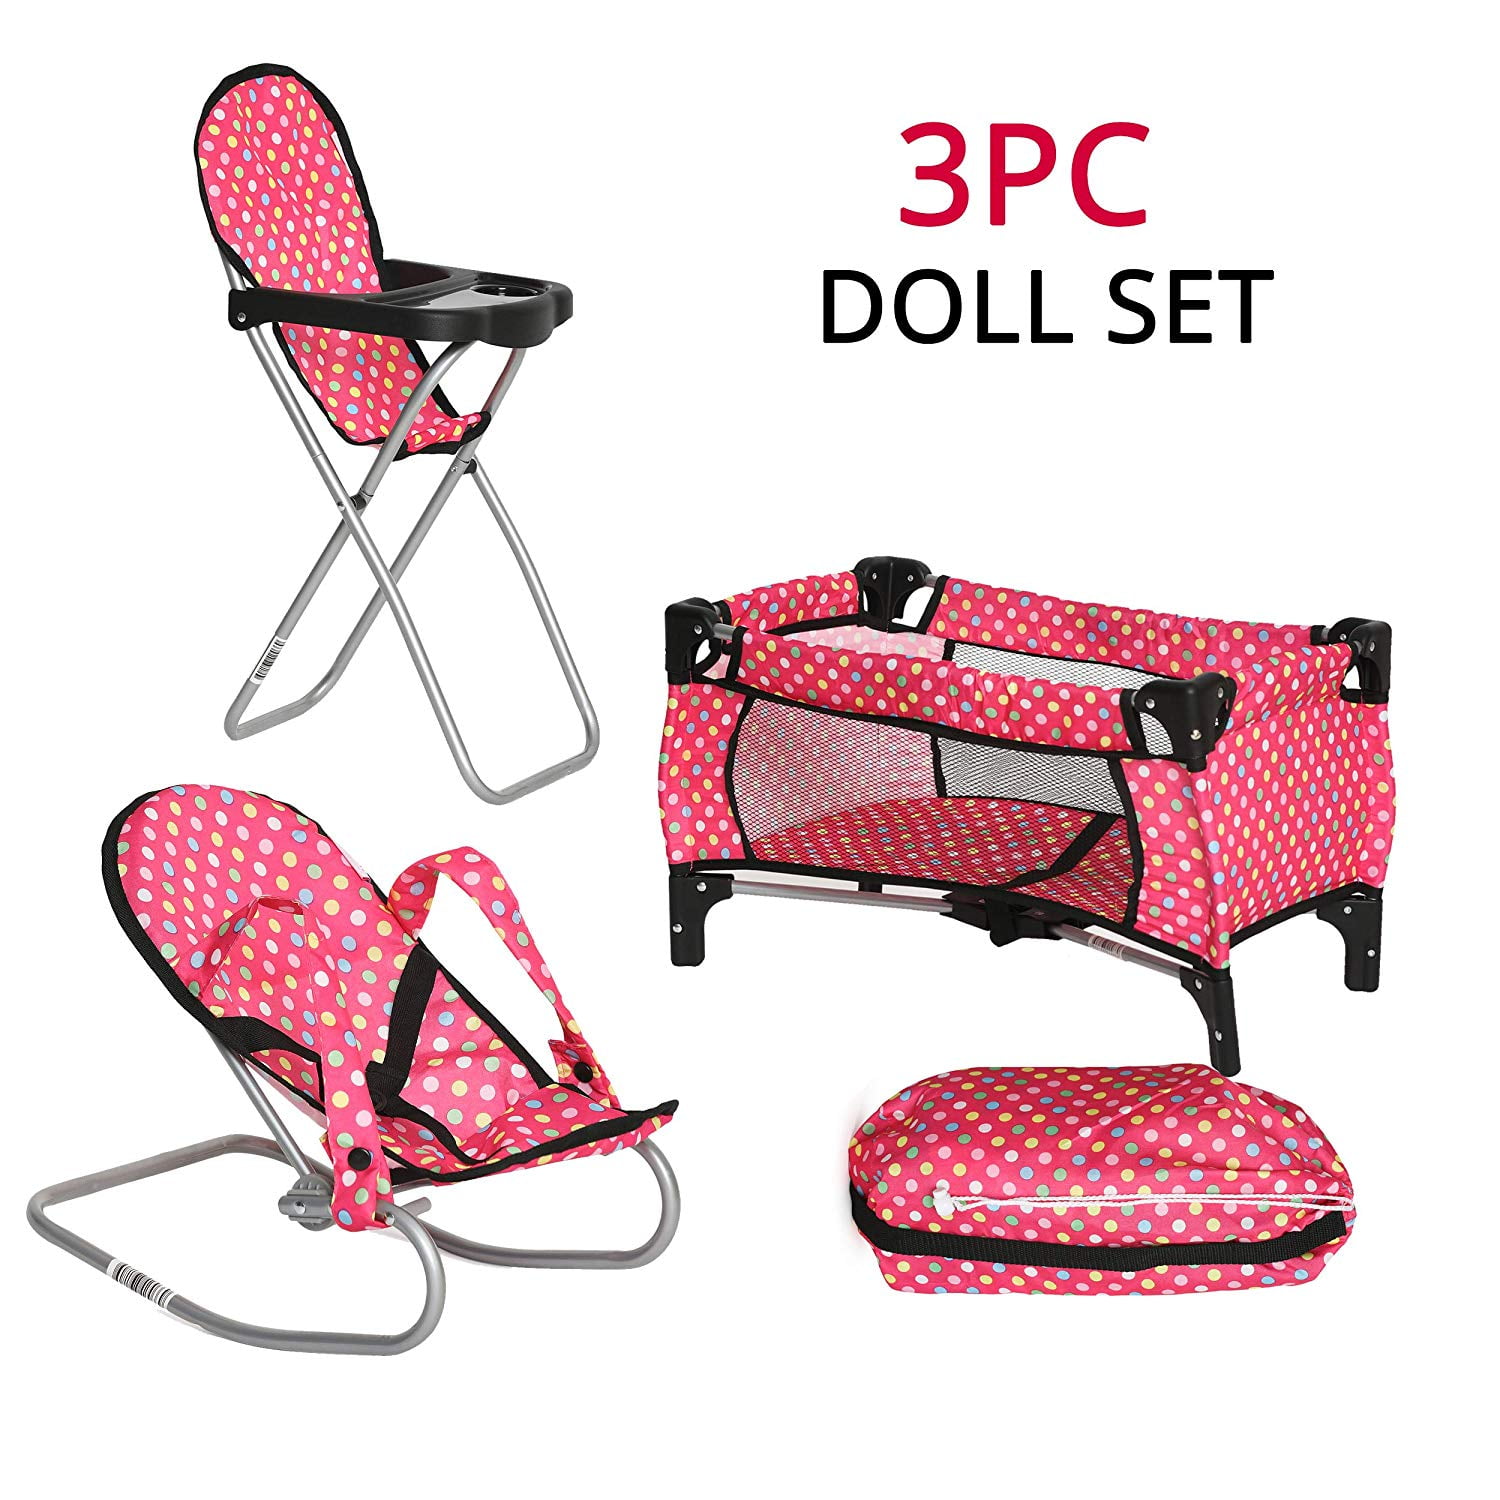 4 seat baby doll stroller